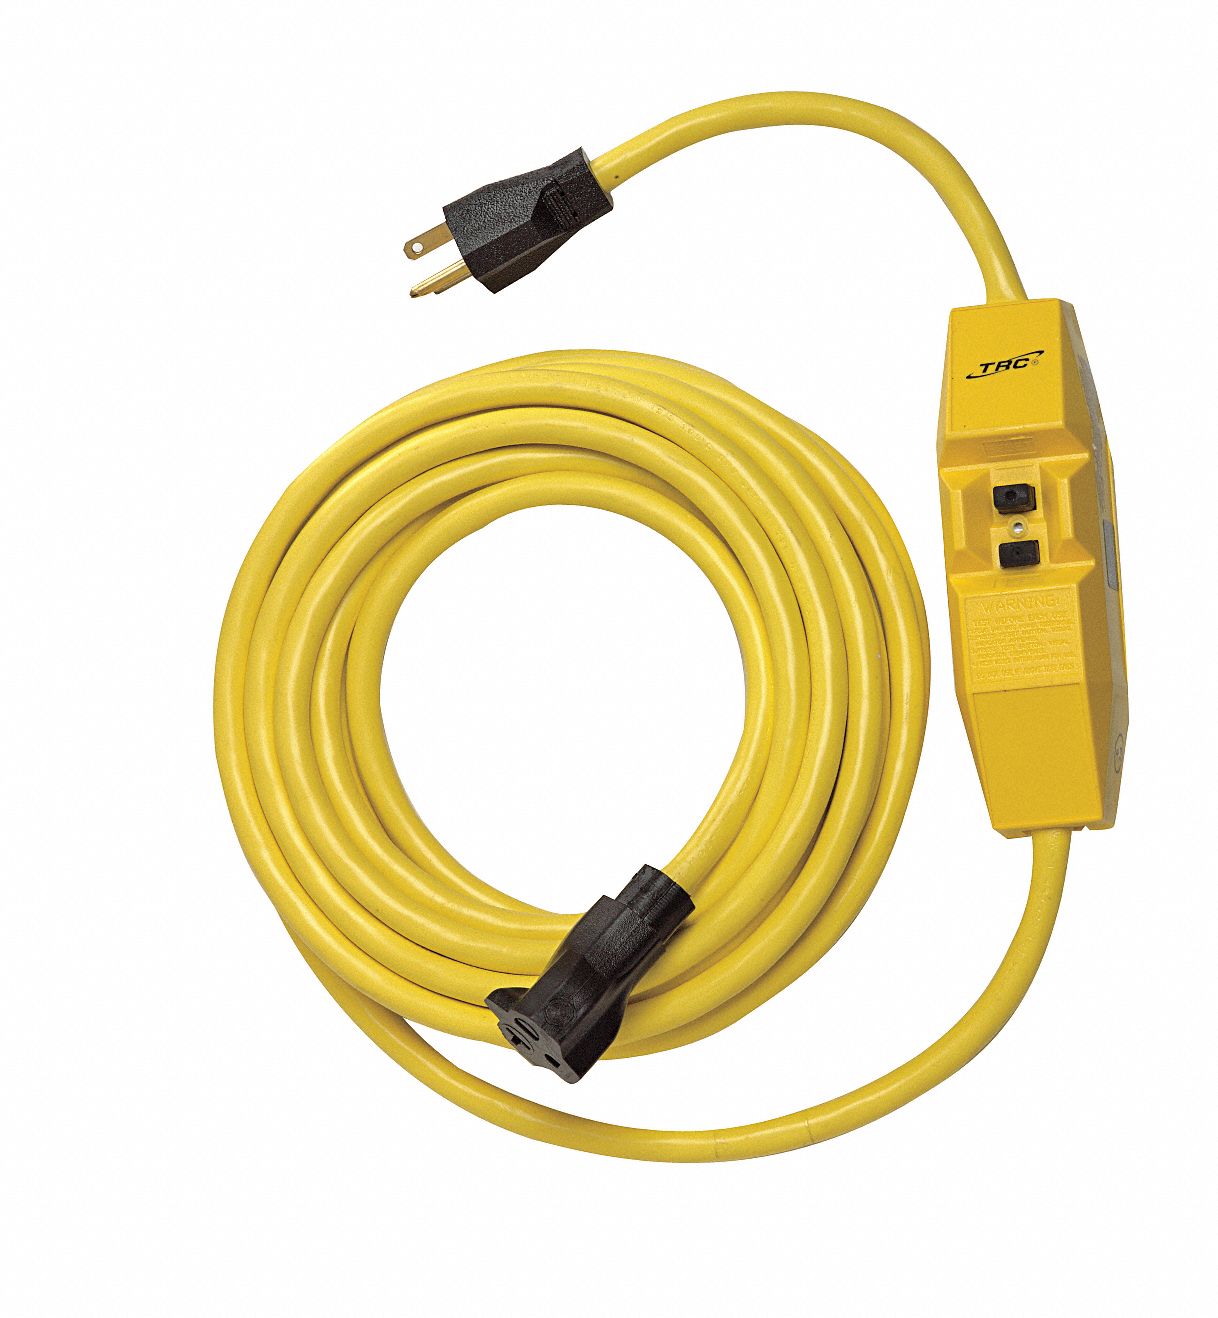 Commercial Duty 50ft Cord Length Woodhead 15051-50 Super-Safeway GFCI Plug and Connector 15A Current 1 Receptacles 120V Voltage 14/3 SJTW Cord Type NEMA 5-15 Configuration 